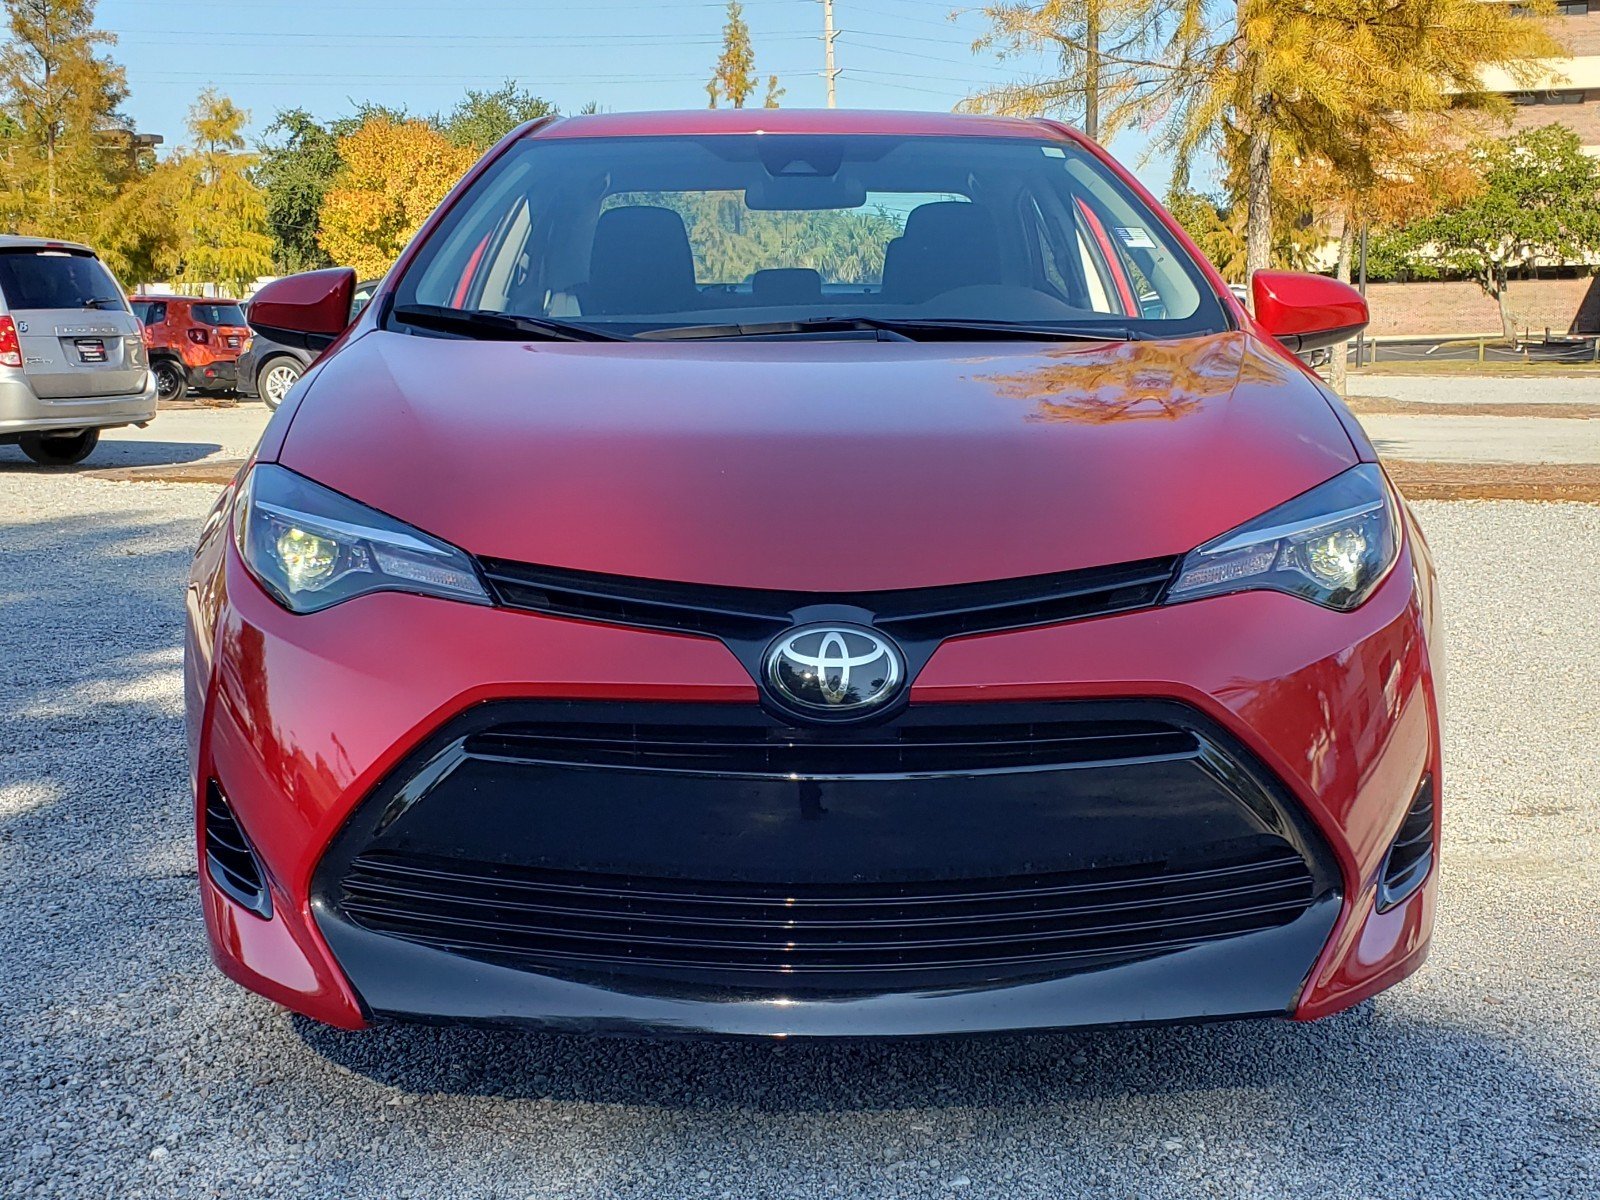 PreOwned 2019 Toyota Corolla 4dr Car in Macon 201019P